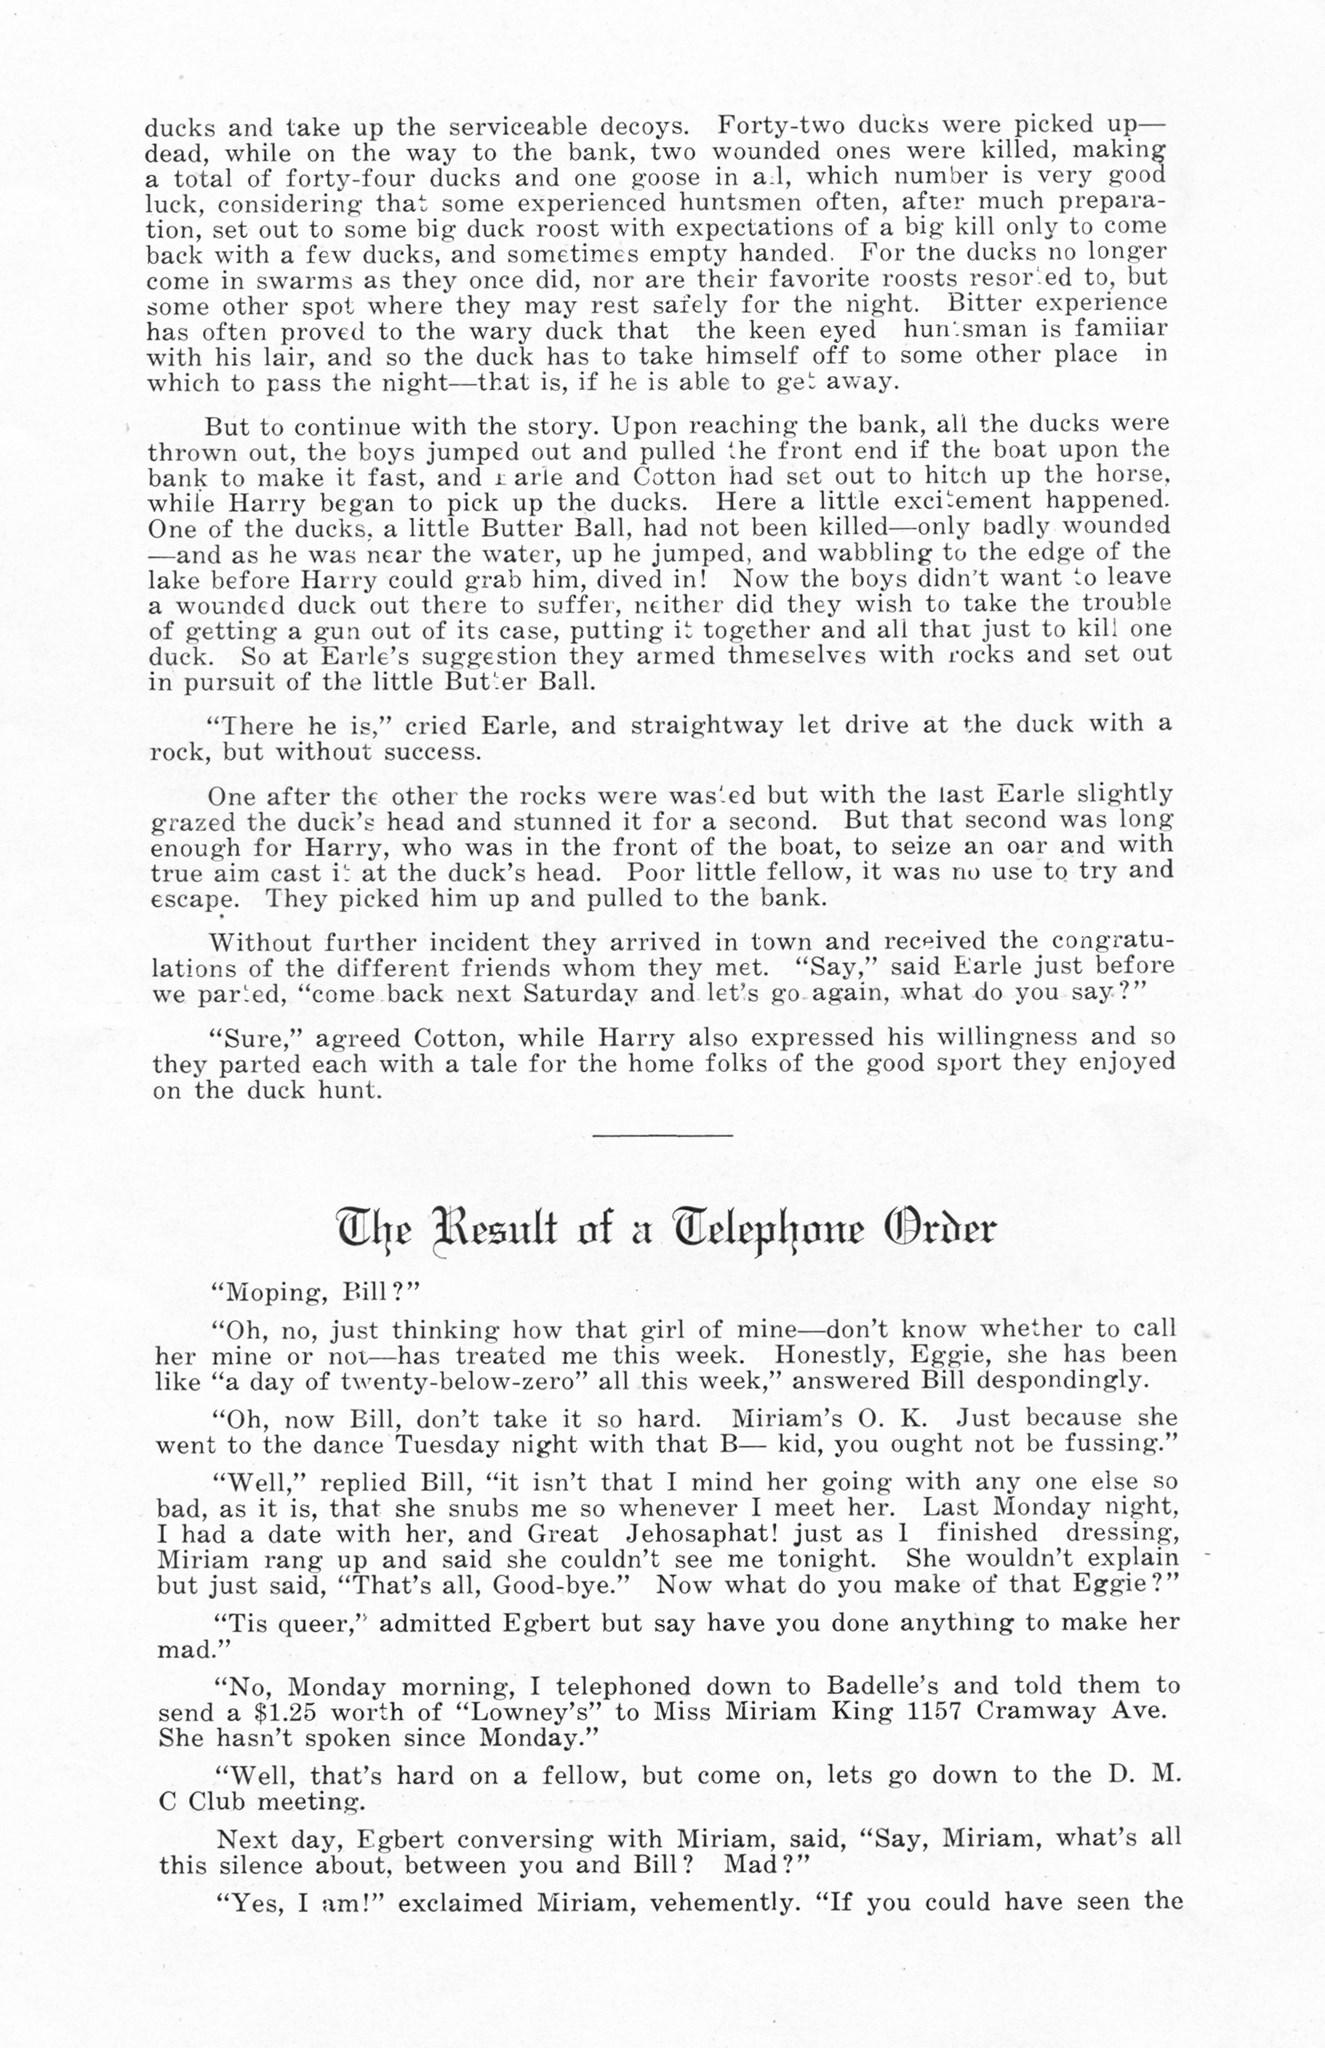 ../../../Images/Large/1912/Arclight-1912-pg0062.jpg